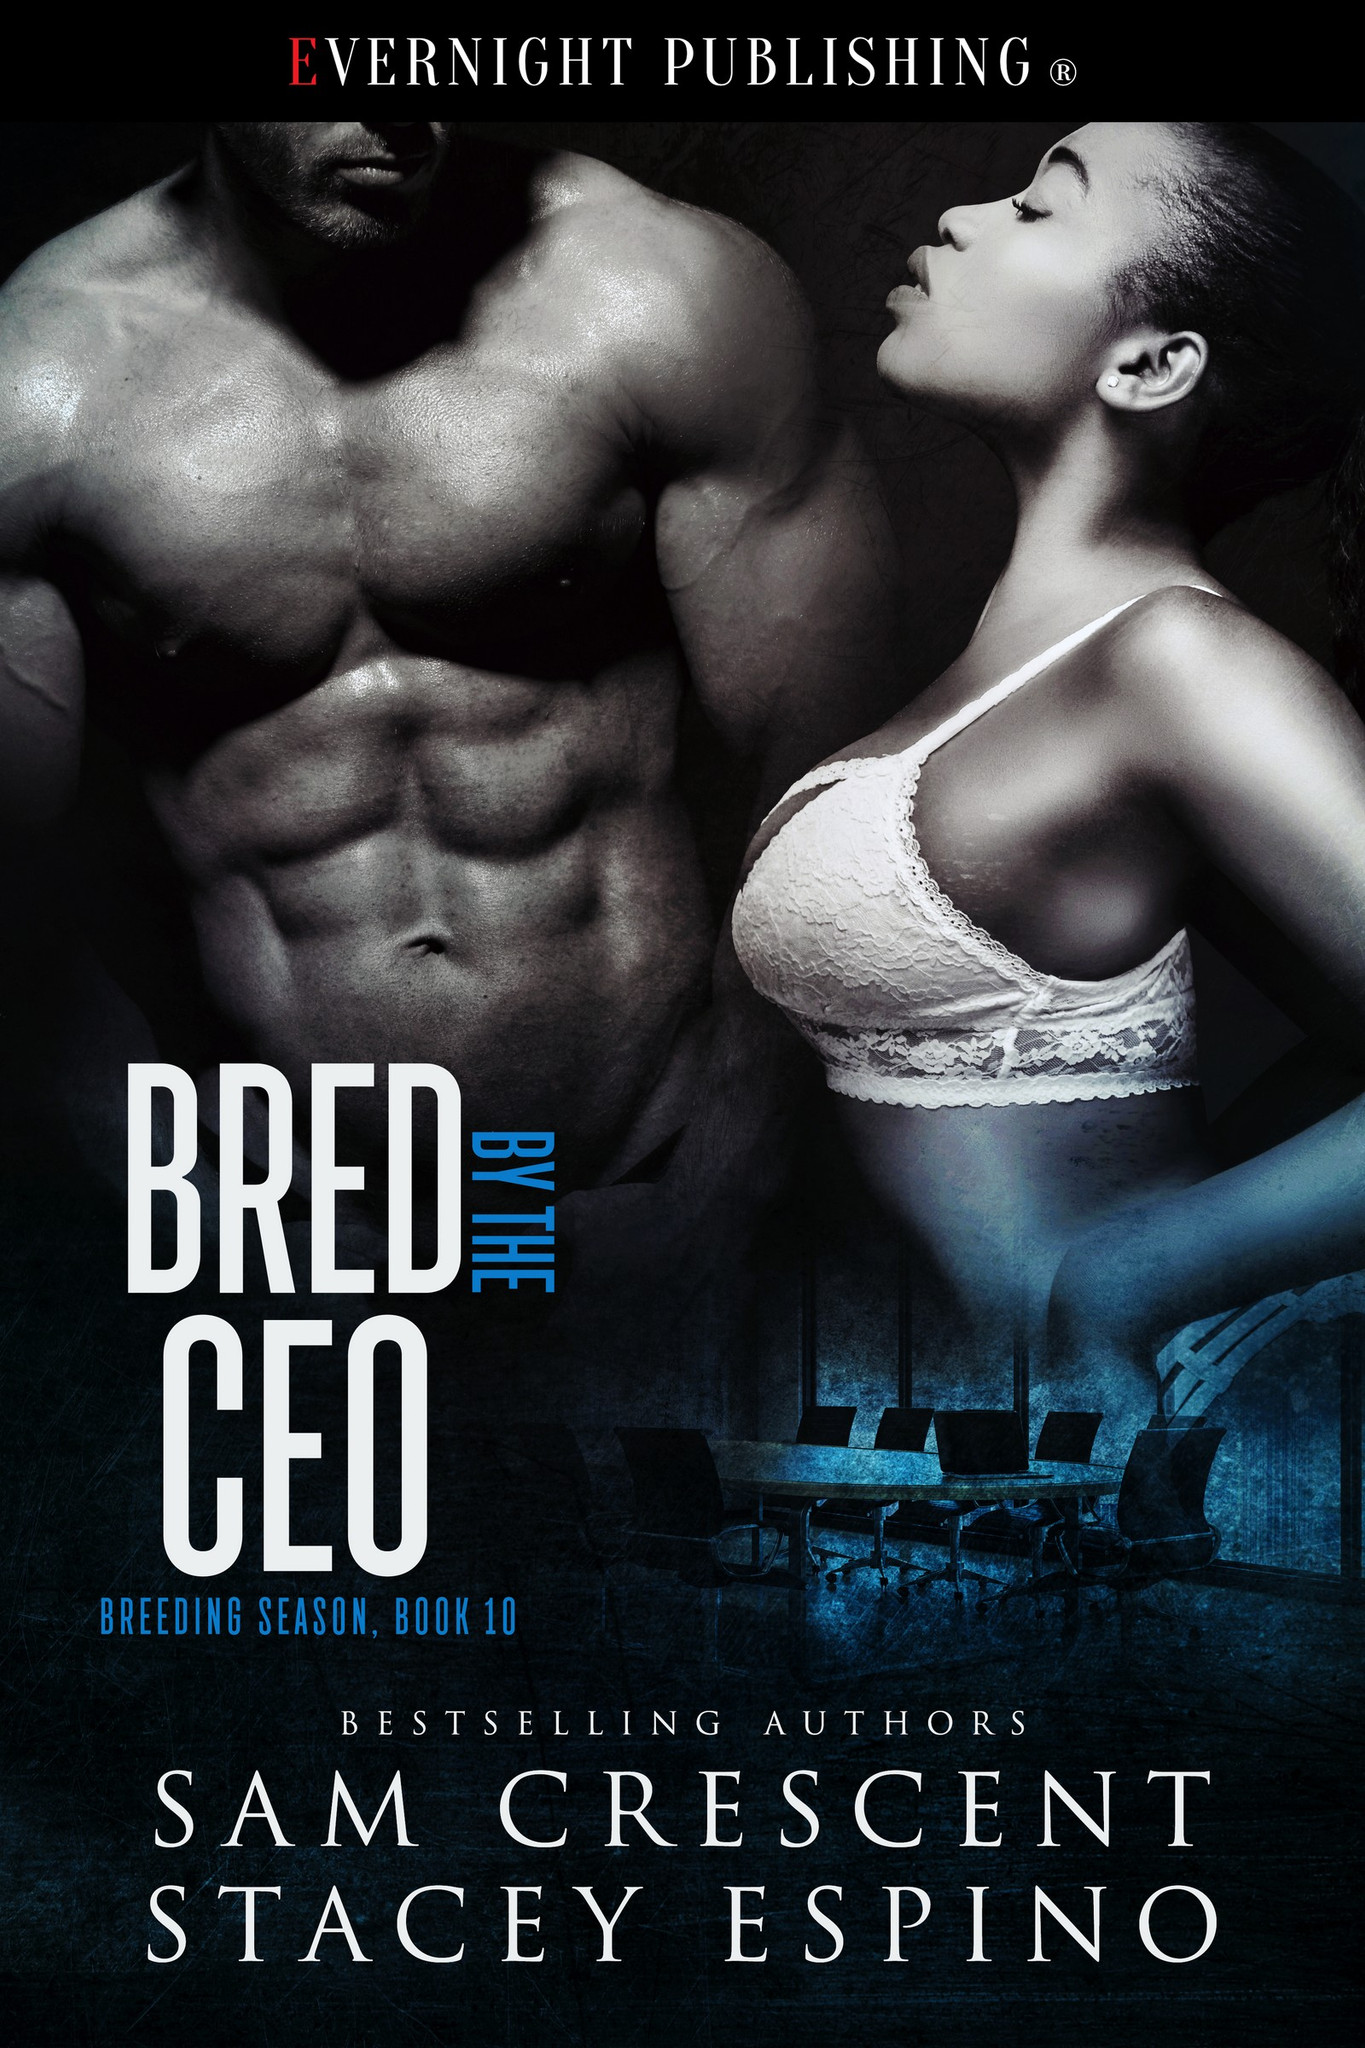 Bred by the CEO by Sam Crescent and Stacey Espino